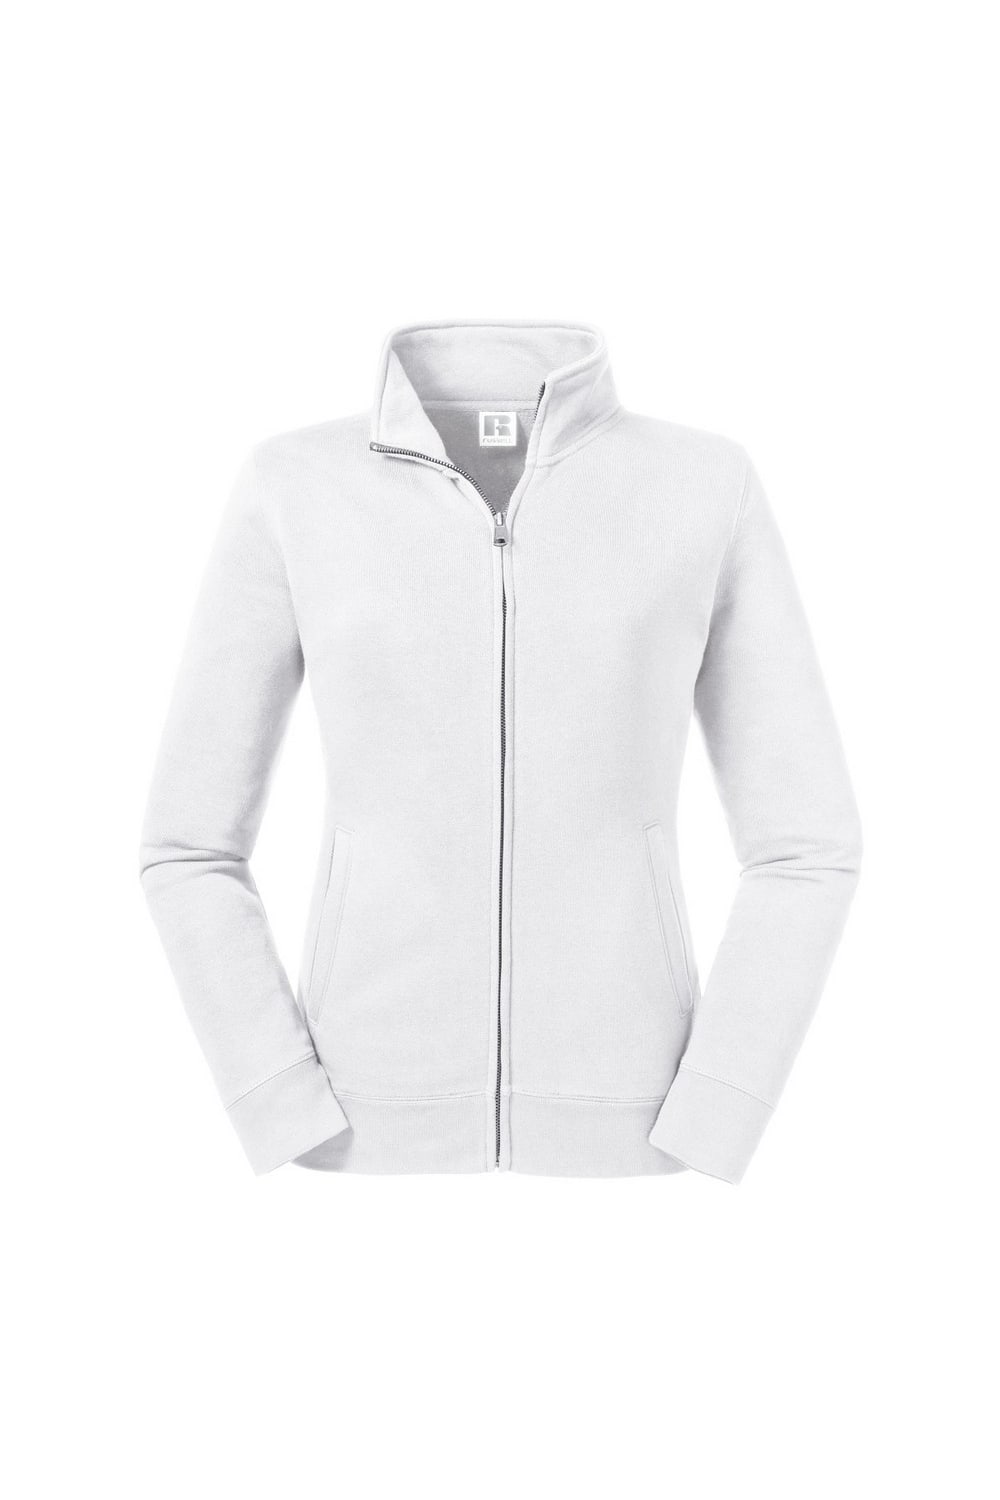 Russell Womens/Ladies Authentic Sweat Jacket (White)